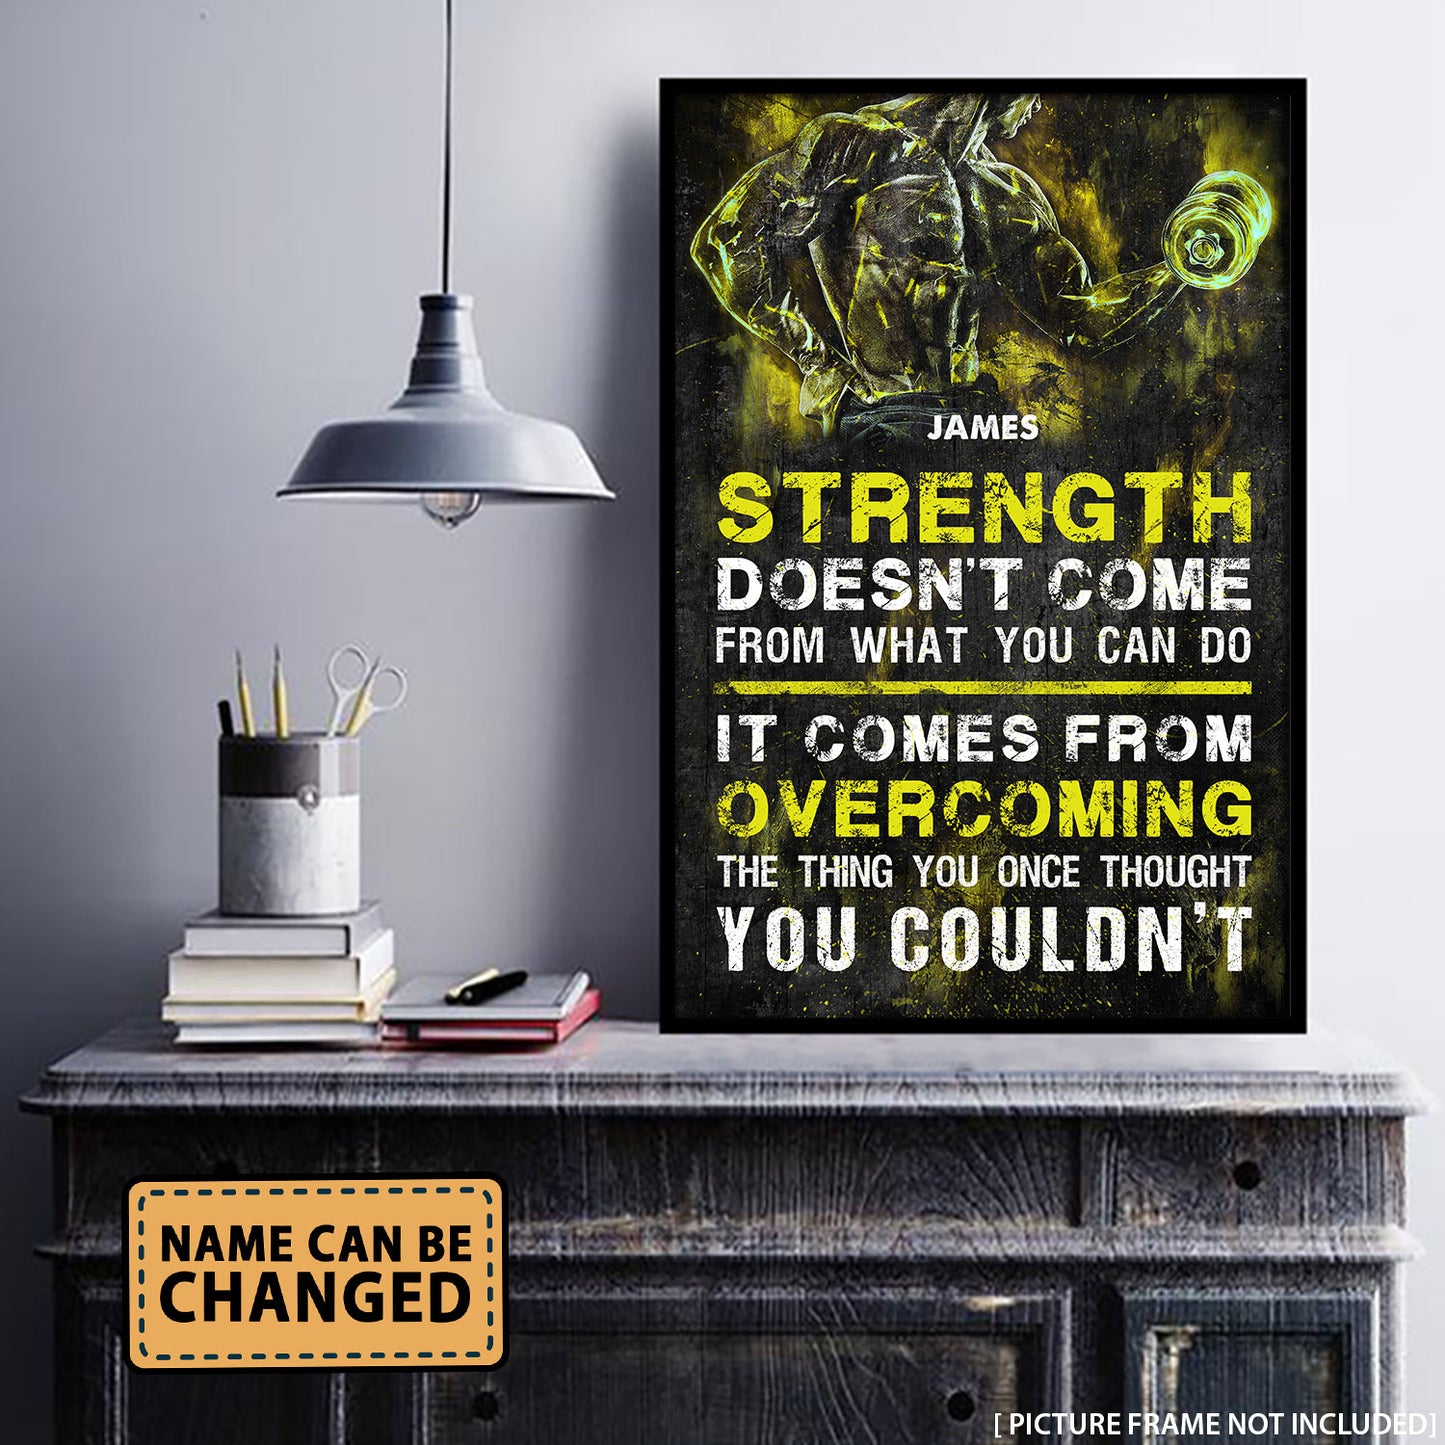 Strength Doesn't Come Personalizedwitch Vertical Poster